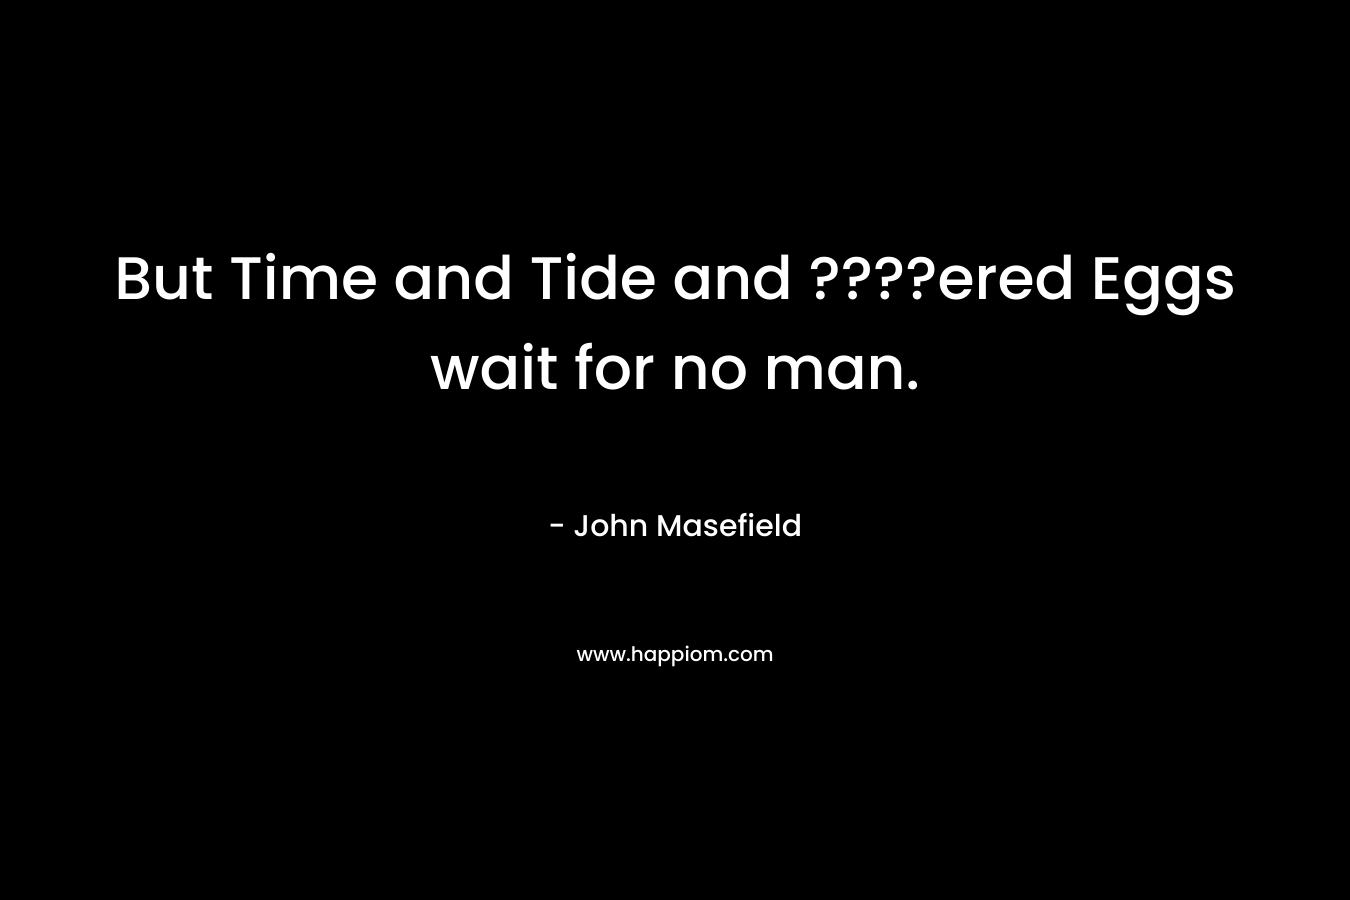 But Time and Tide and ????ered Eggs wait for no man. – John Masefield